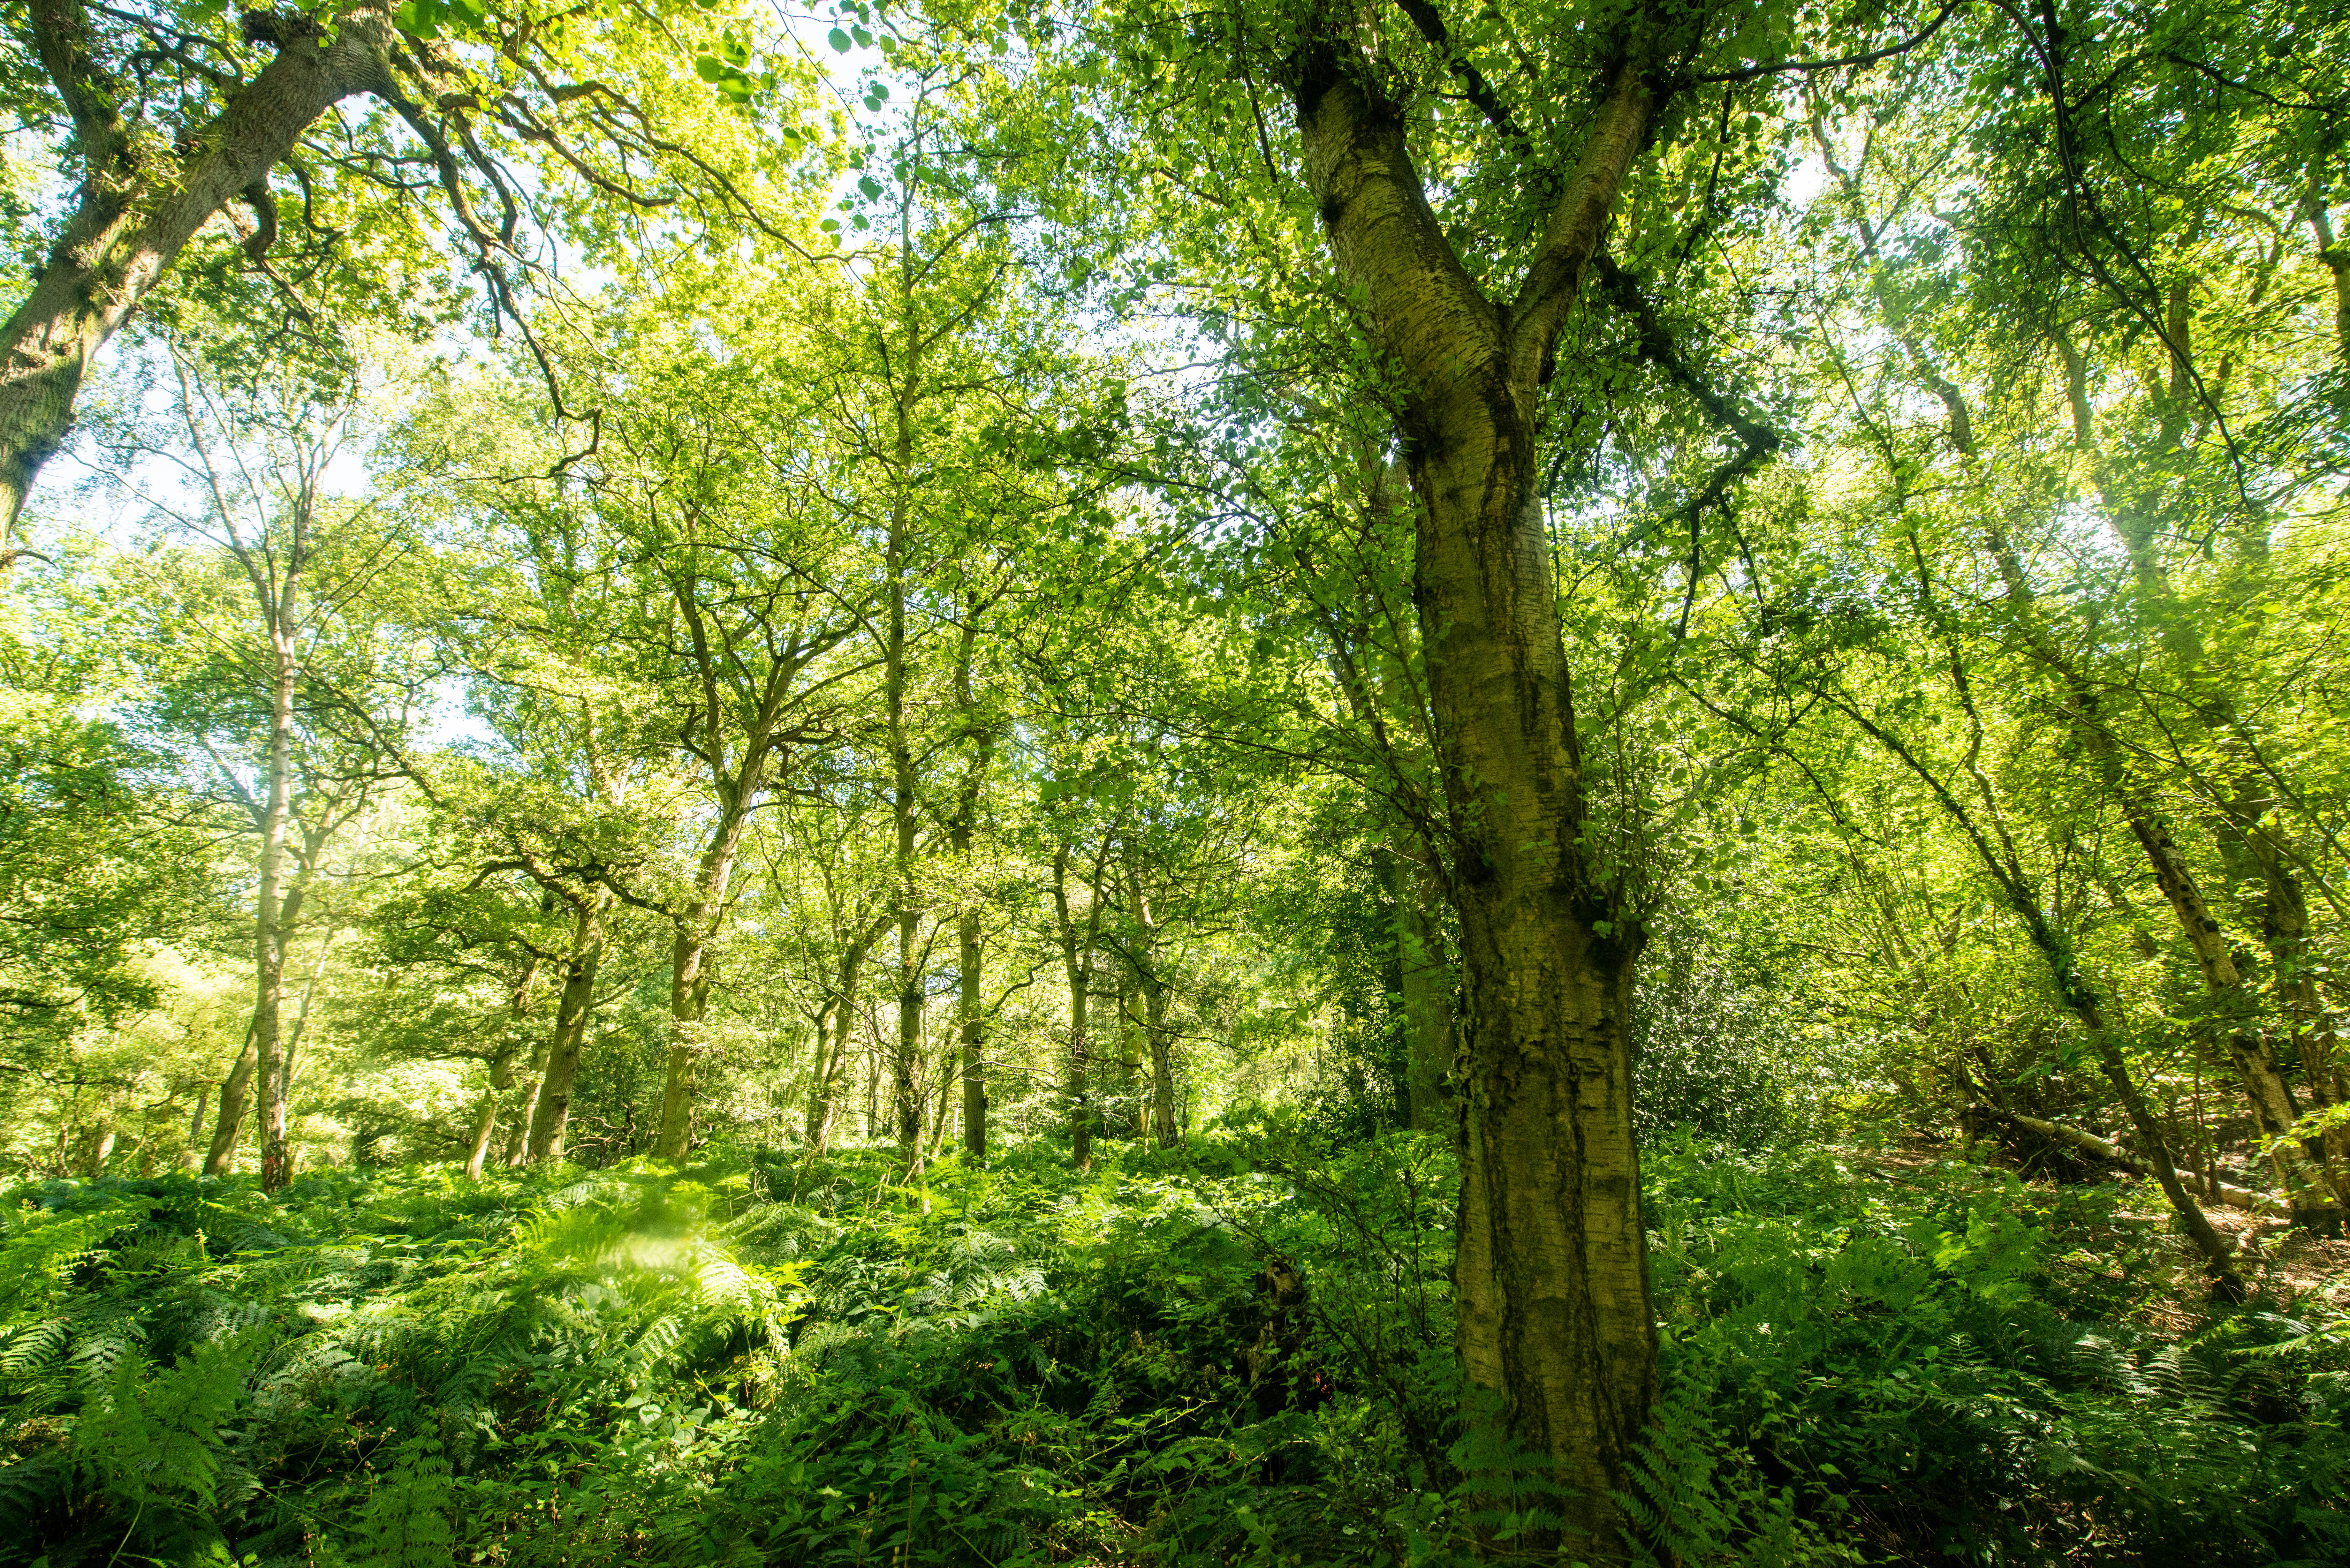 Broadwells Wood, Warwickshire, will also be affected, the Woodland Trust said (Philip Formby/Woodland Trust/PA)